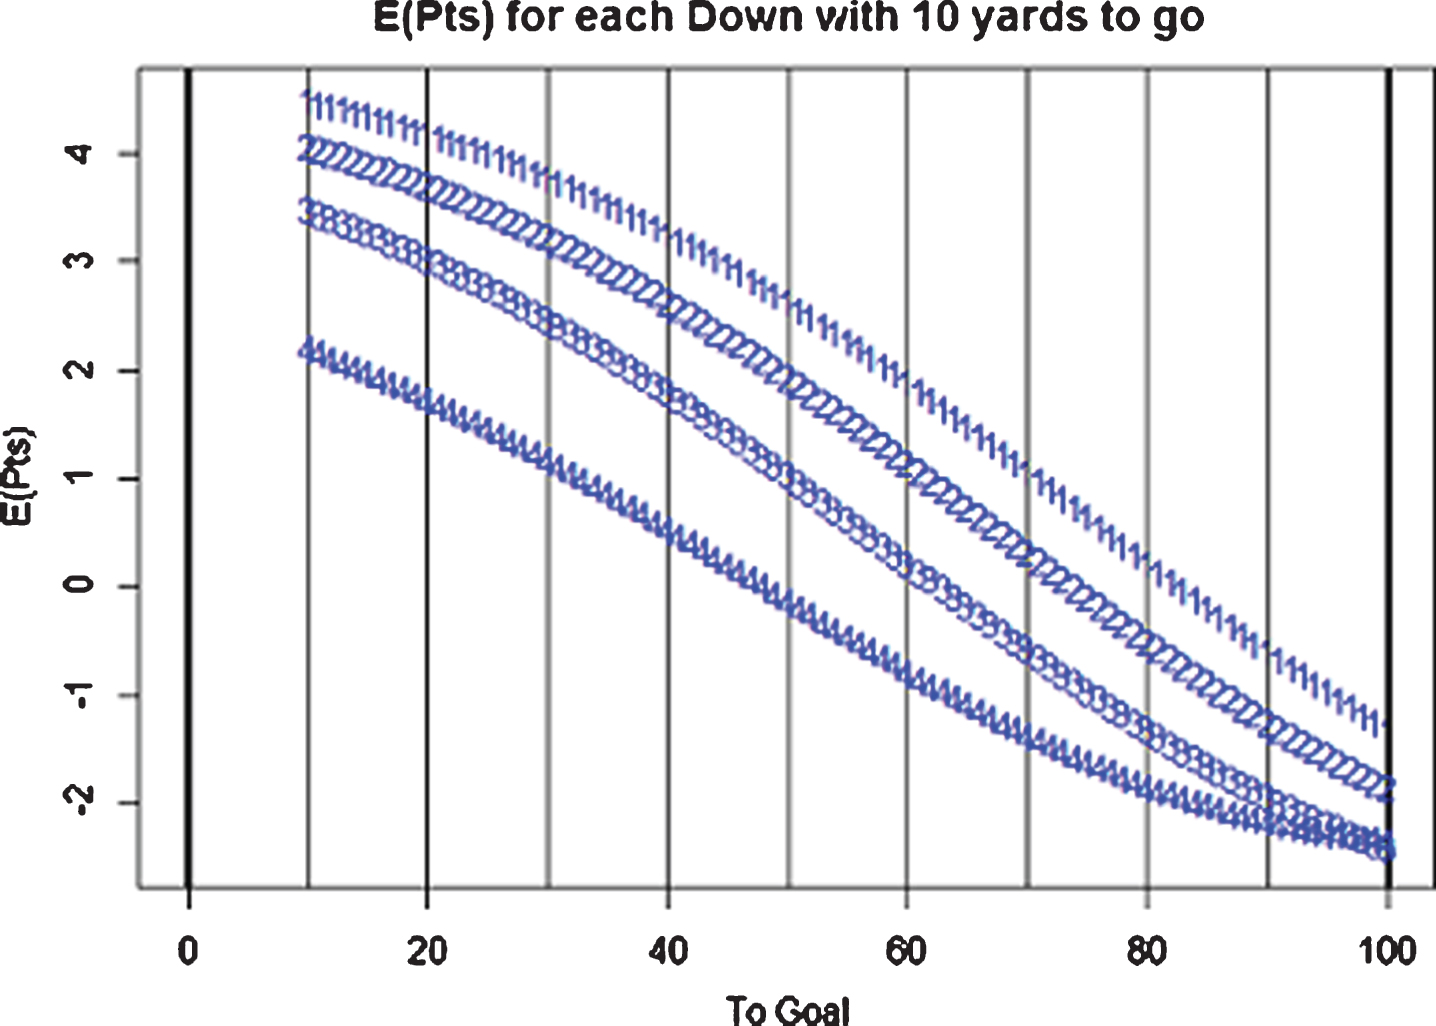 Expected Points Output, based on a model built on actual points scored in the 2005–2013 FBS division collegiate football games.